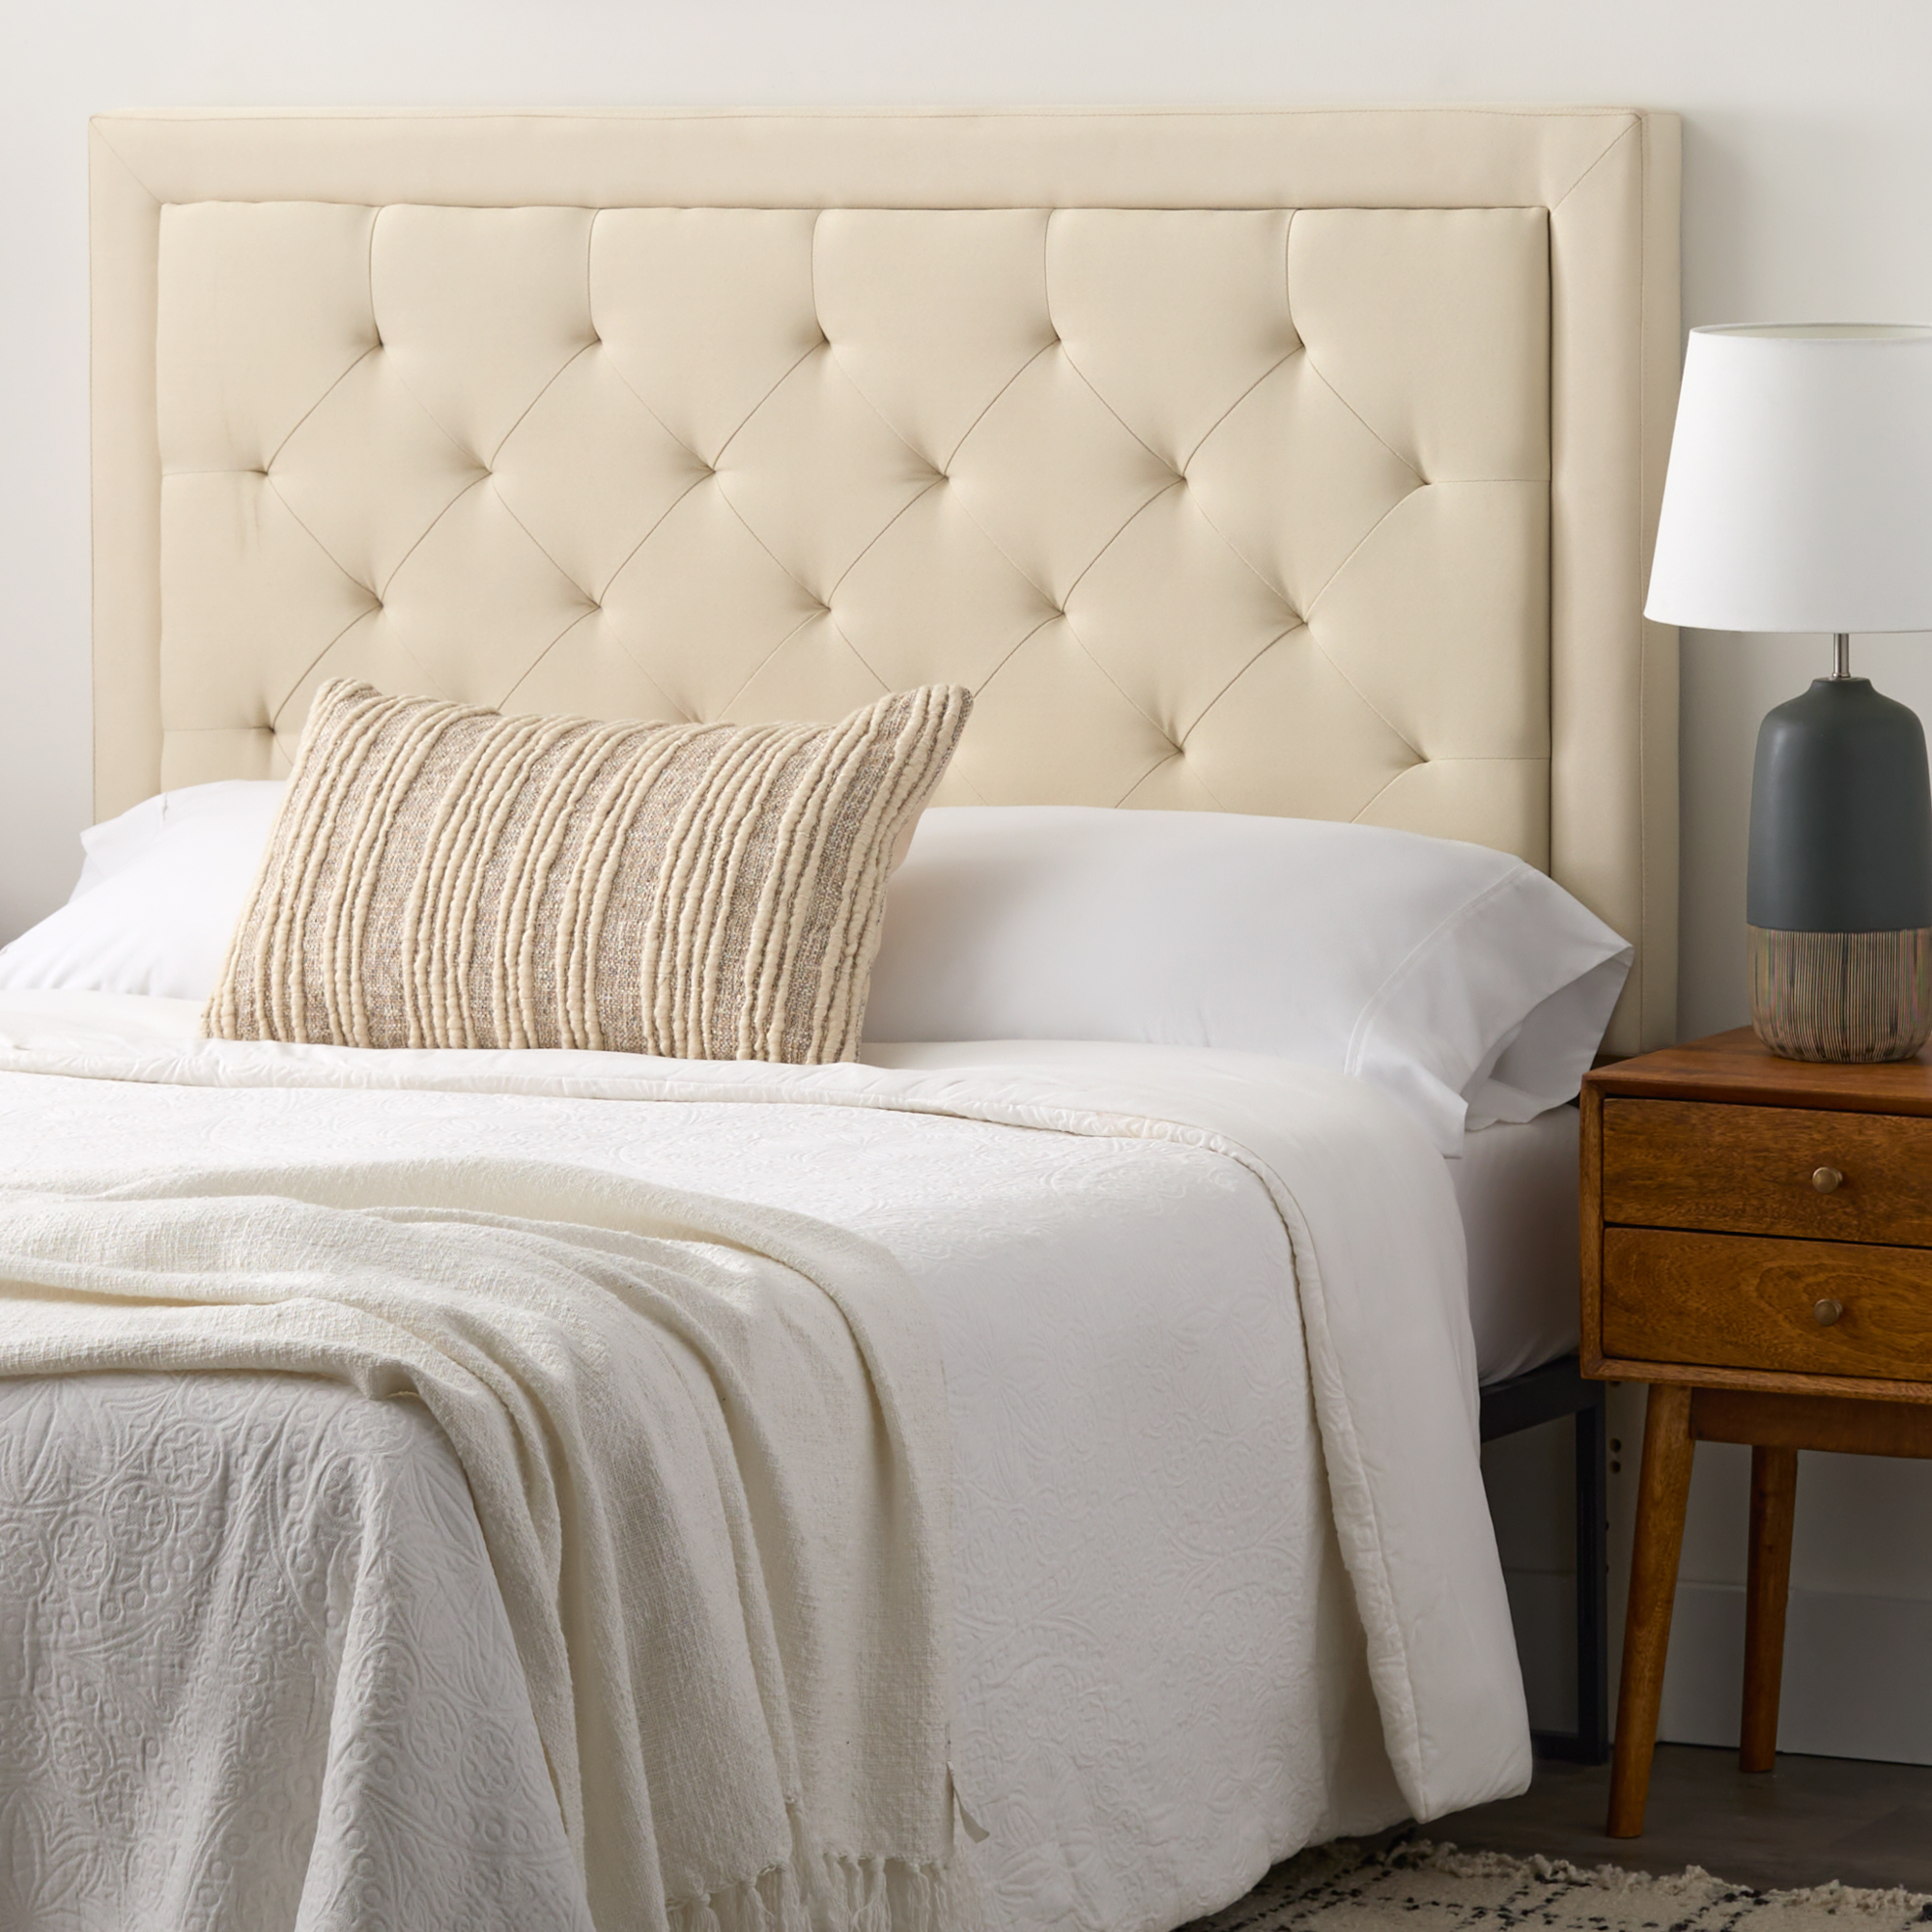 Rest Haven Medford Rectangle Upholstered Headboard with Diamond Tufting, Full, Cream - image 1 of 11